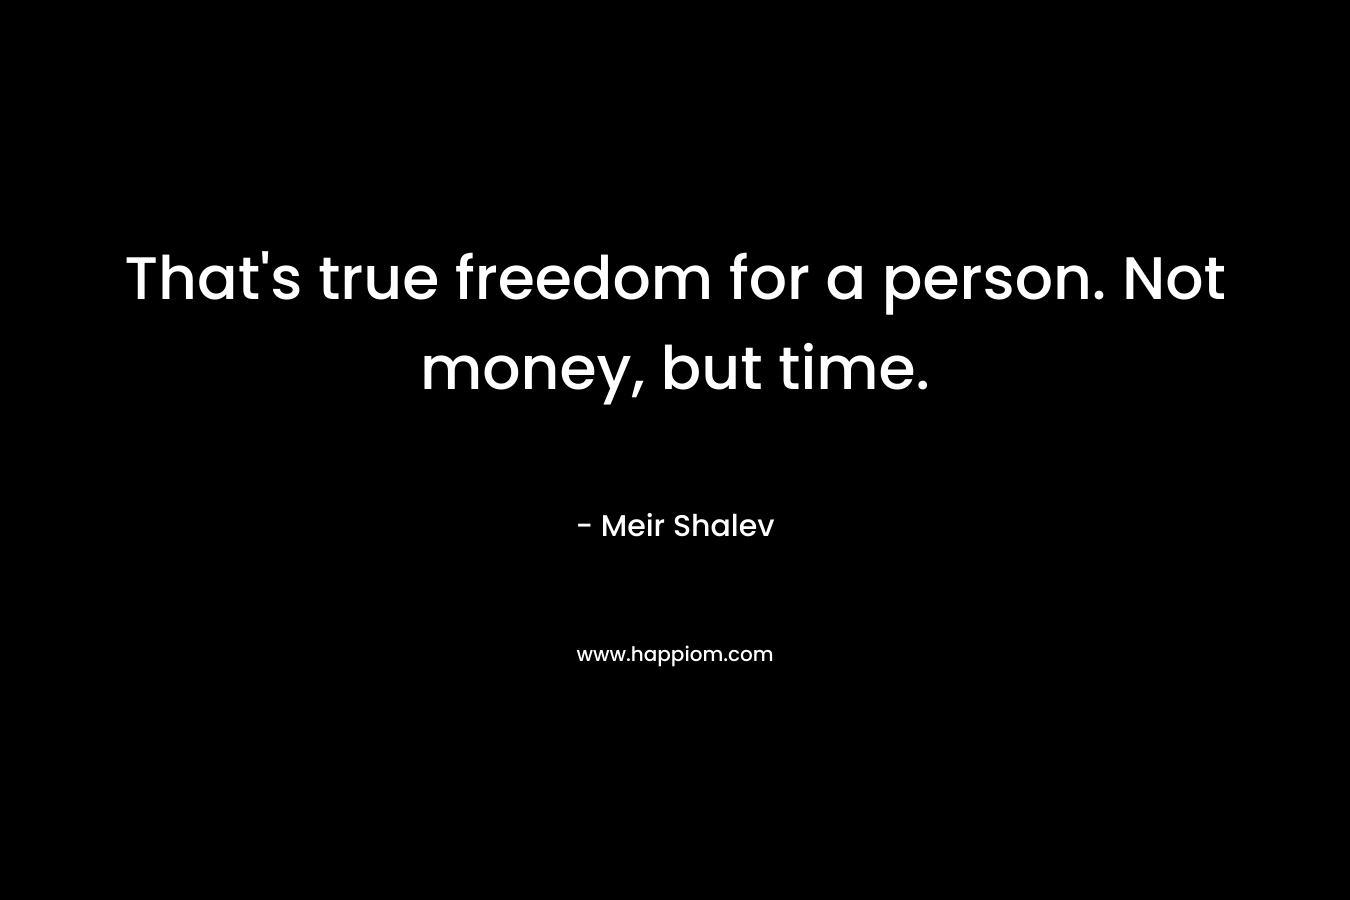 That's true freedom for a person. Not money, but time.